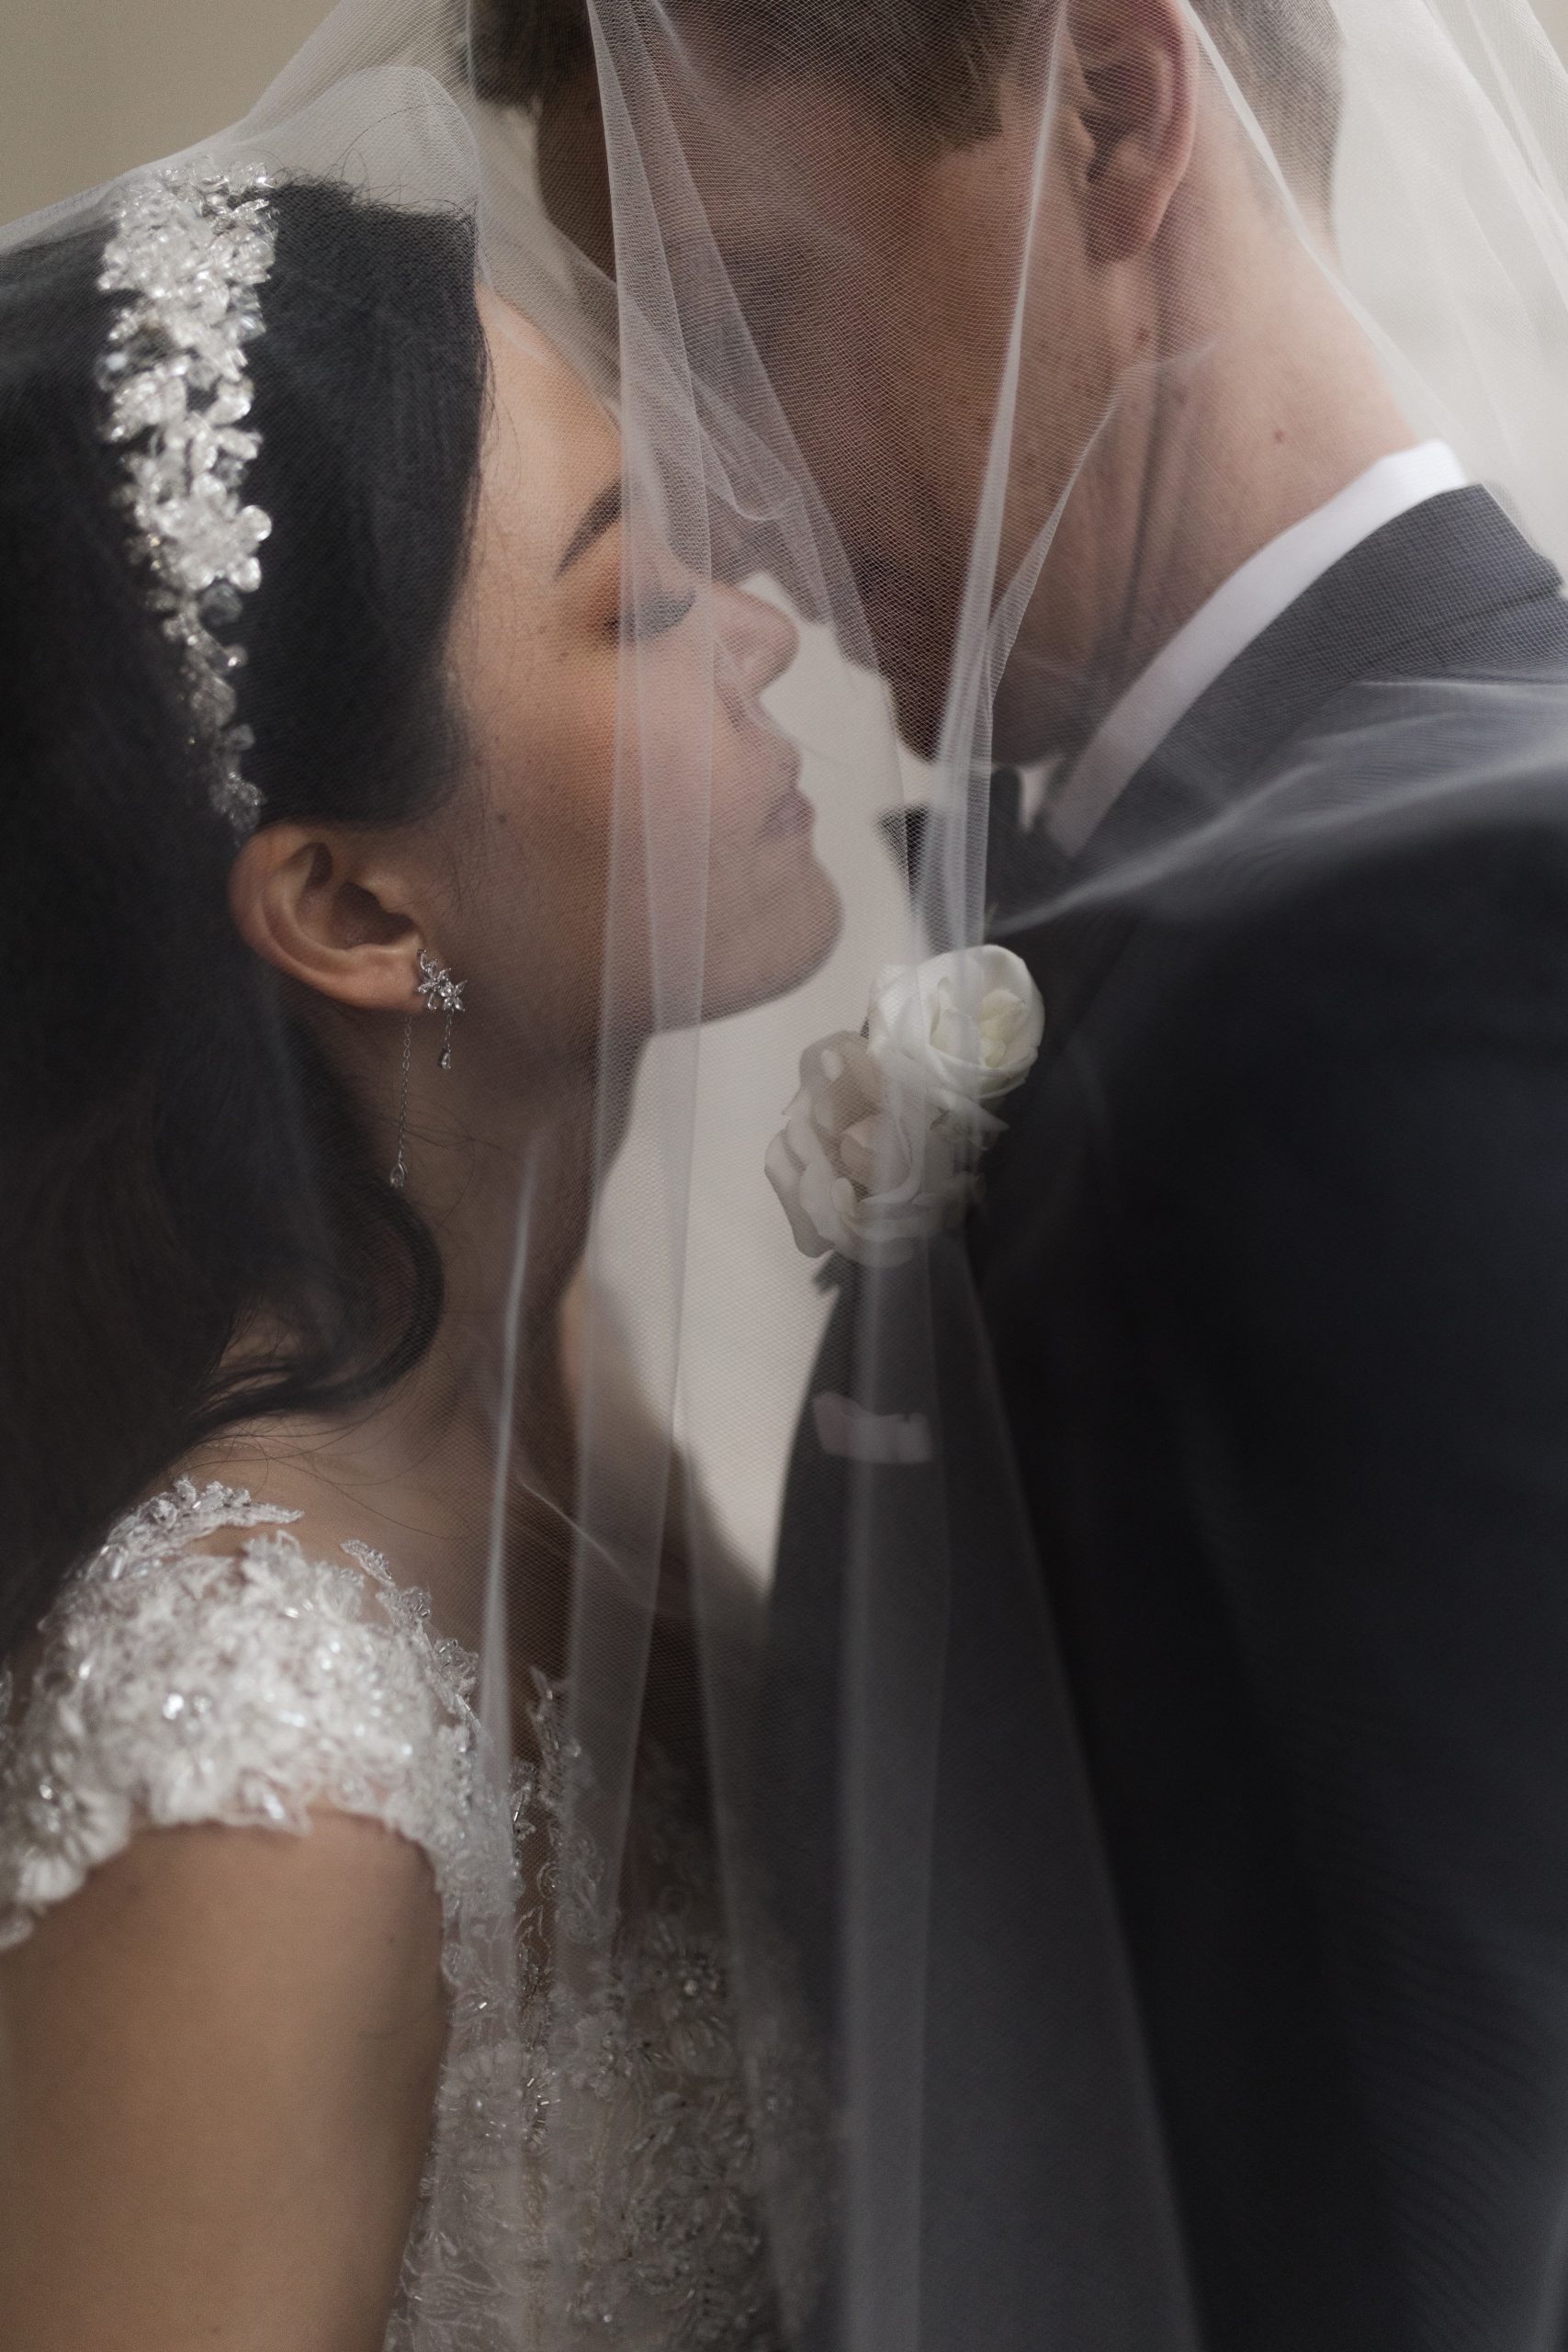 Bride and groom lean in for a kiss under the bride's sheer veil, captured by Kyla Jeanette Photography